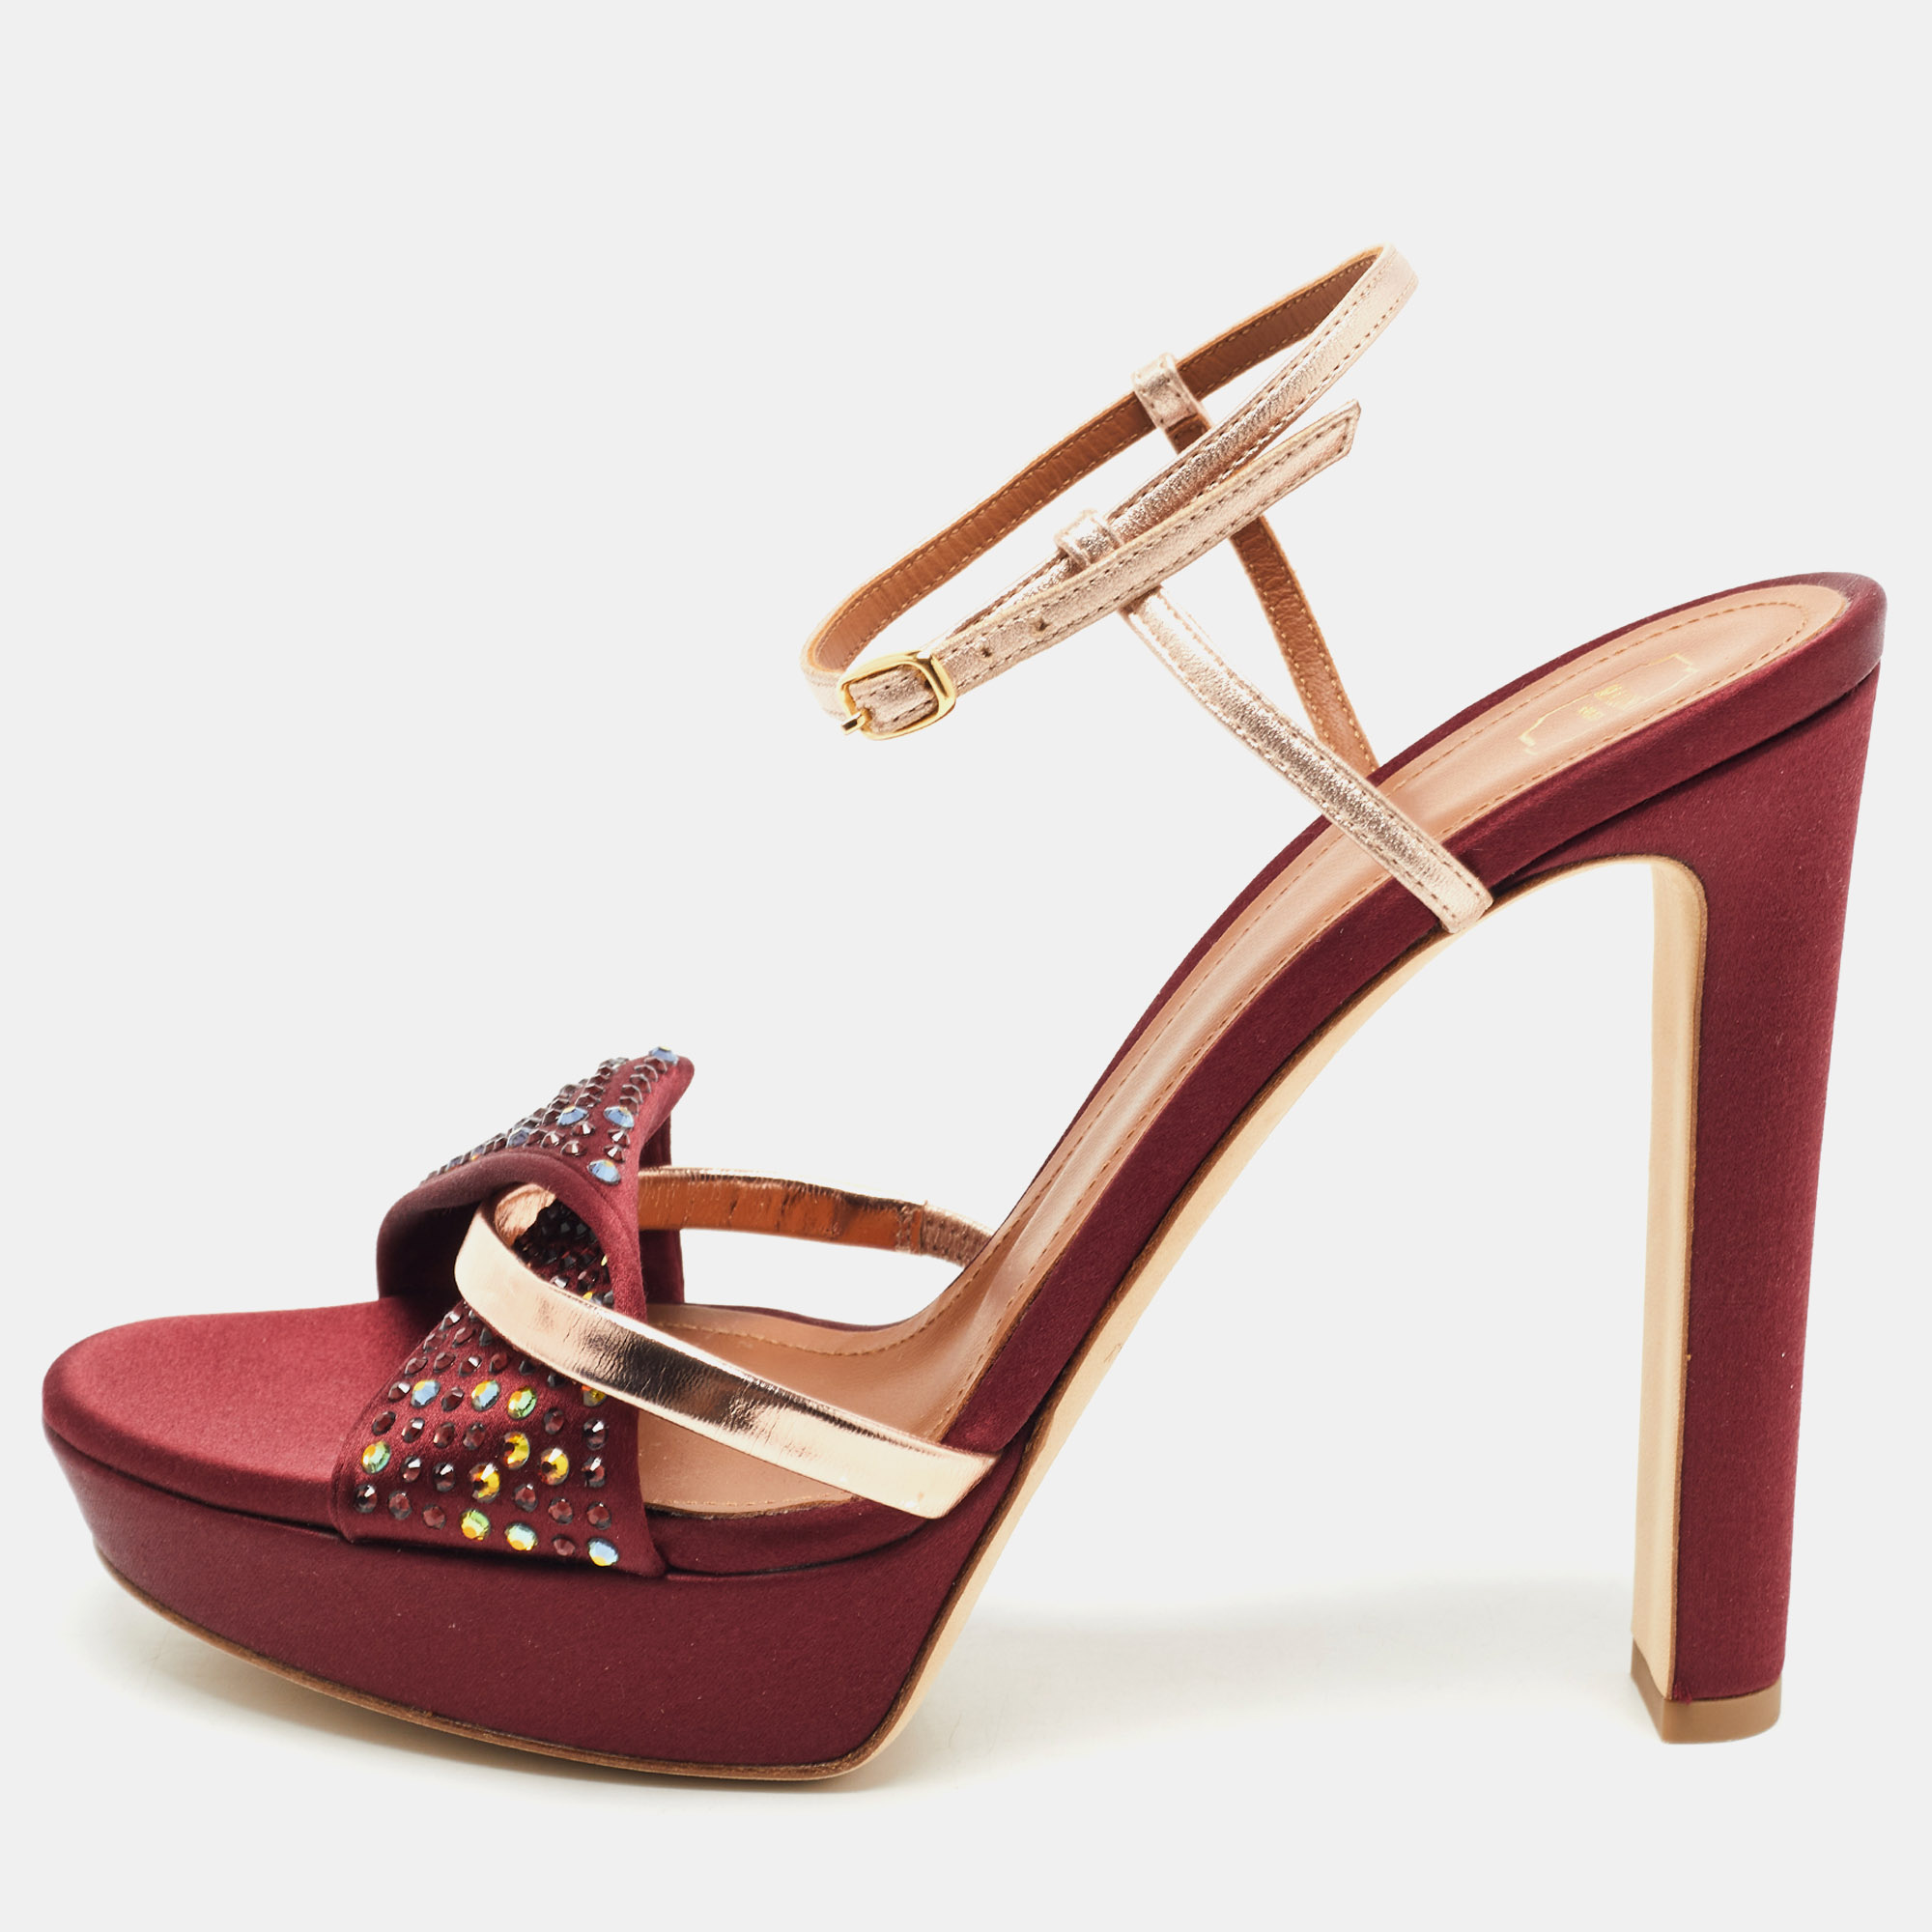 Pre-owned Malone Souliers Burgundy Satin And Leather Ankle Strap Sandals Size 39.5